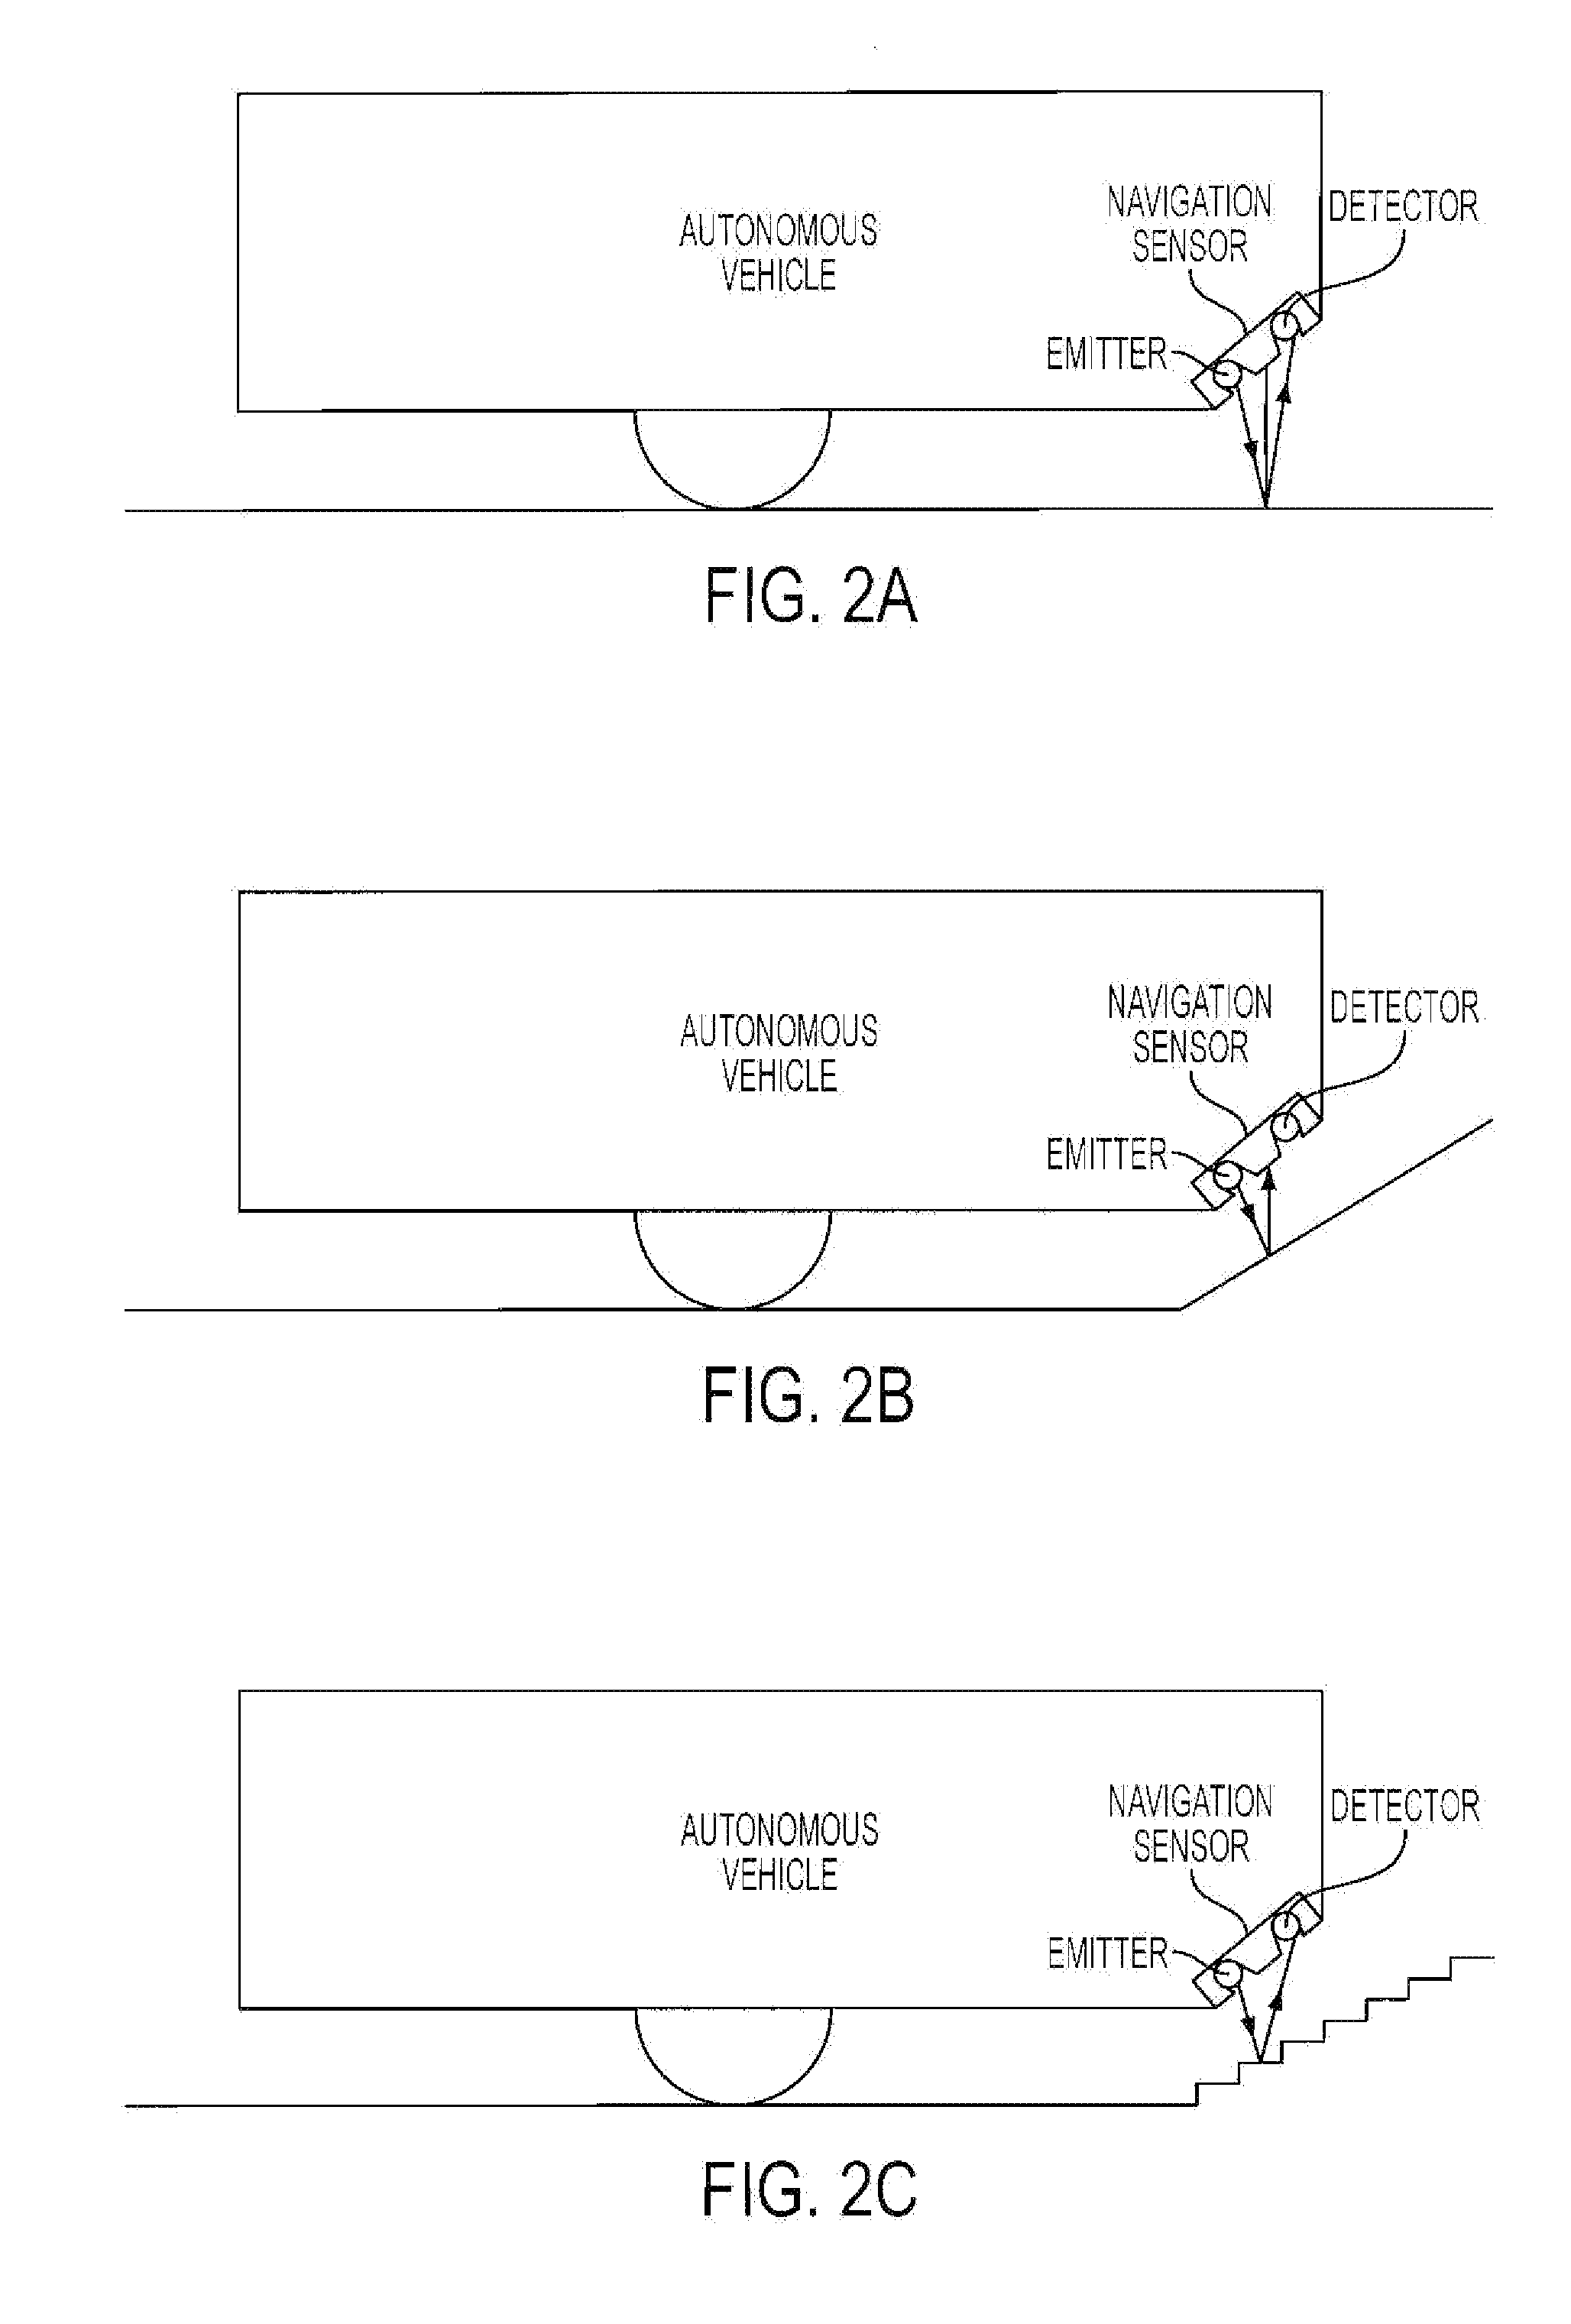 Device for Influencing Navigation of an Autonomous Vehicle